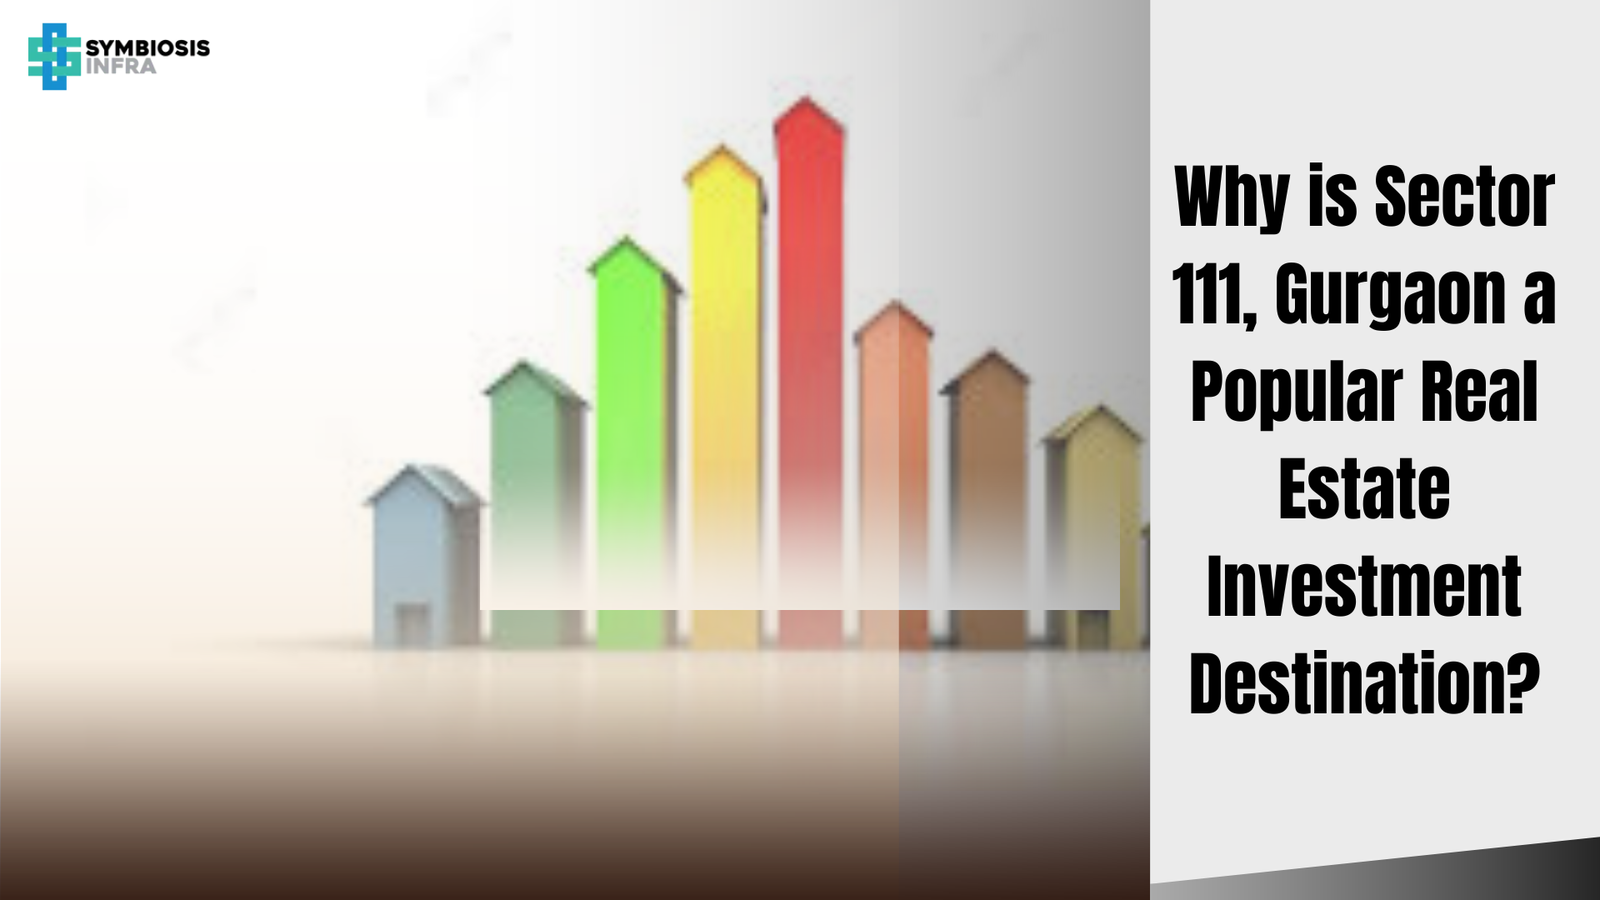 Why is Sector 111, Gurgaon a Popular Real Estate Investment Destination?